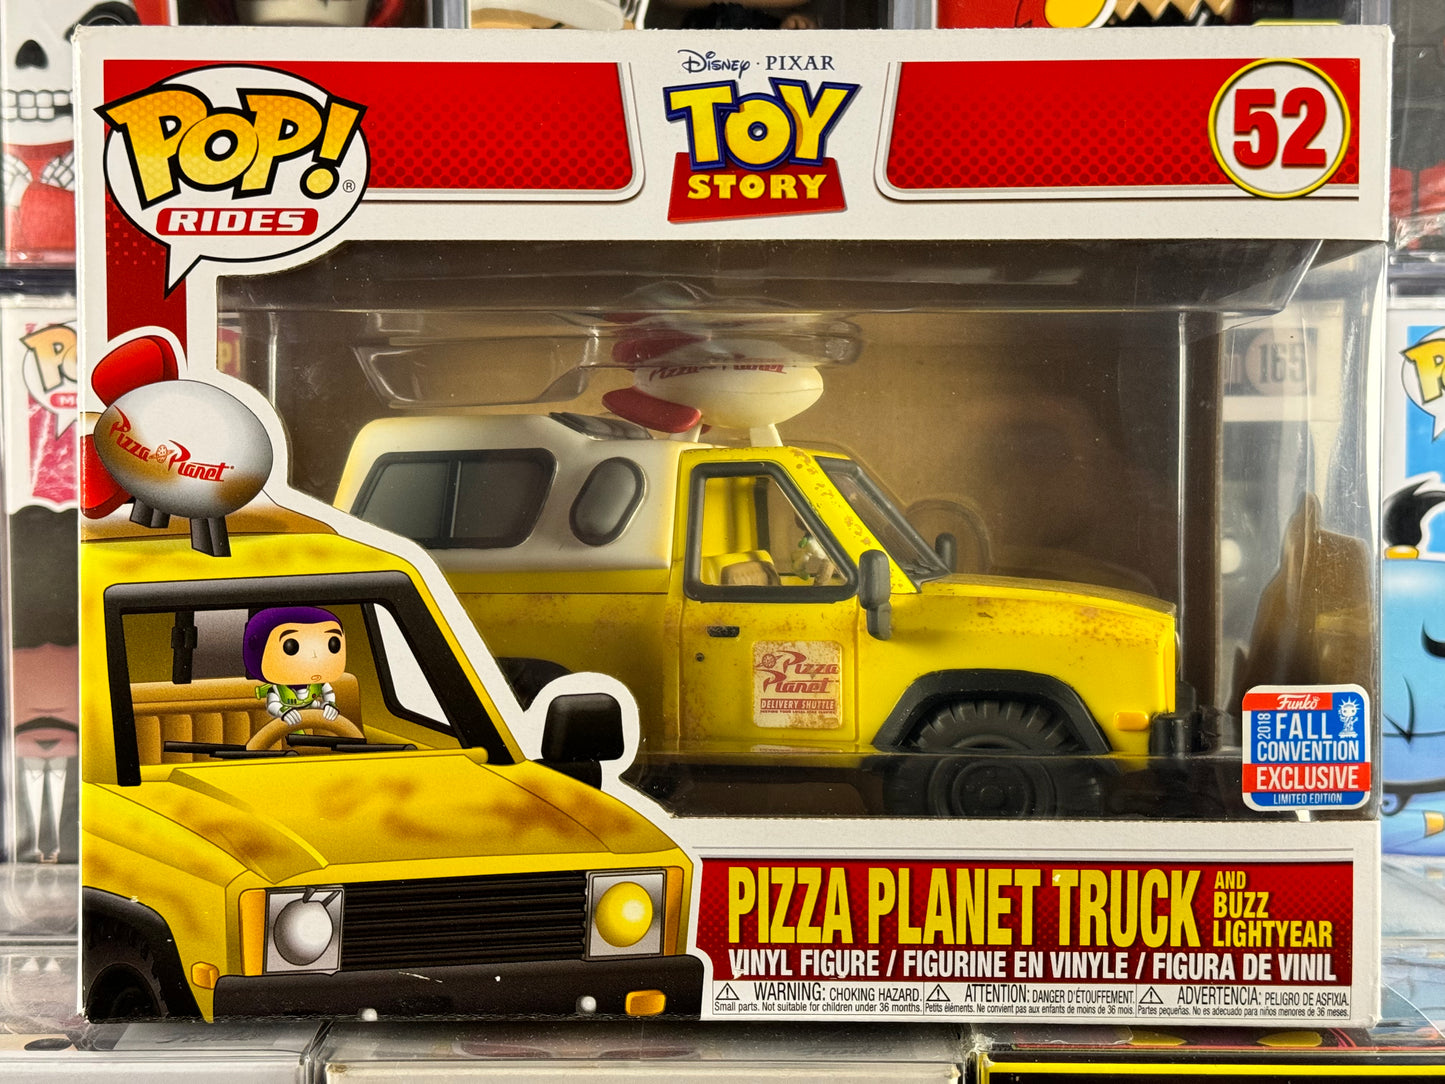 Disney Pixar Toy Story - Rides - Pizza Planet Truck (w/ Buzz Lightyear) (52) Vaulted 2018 Fall Convention Exclusive